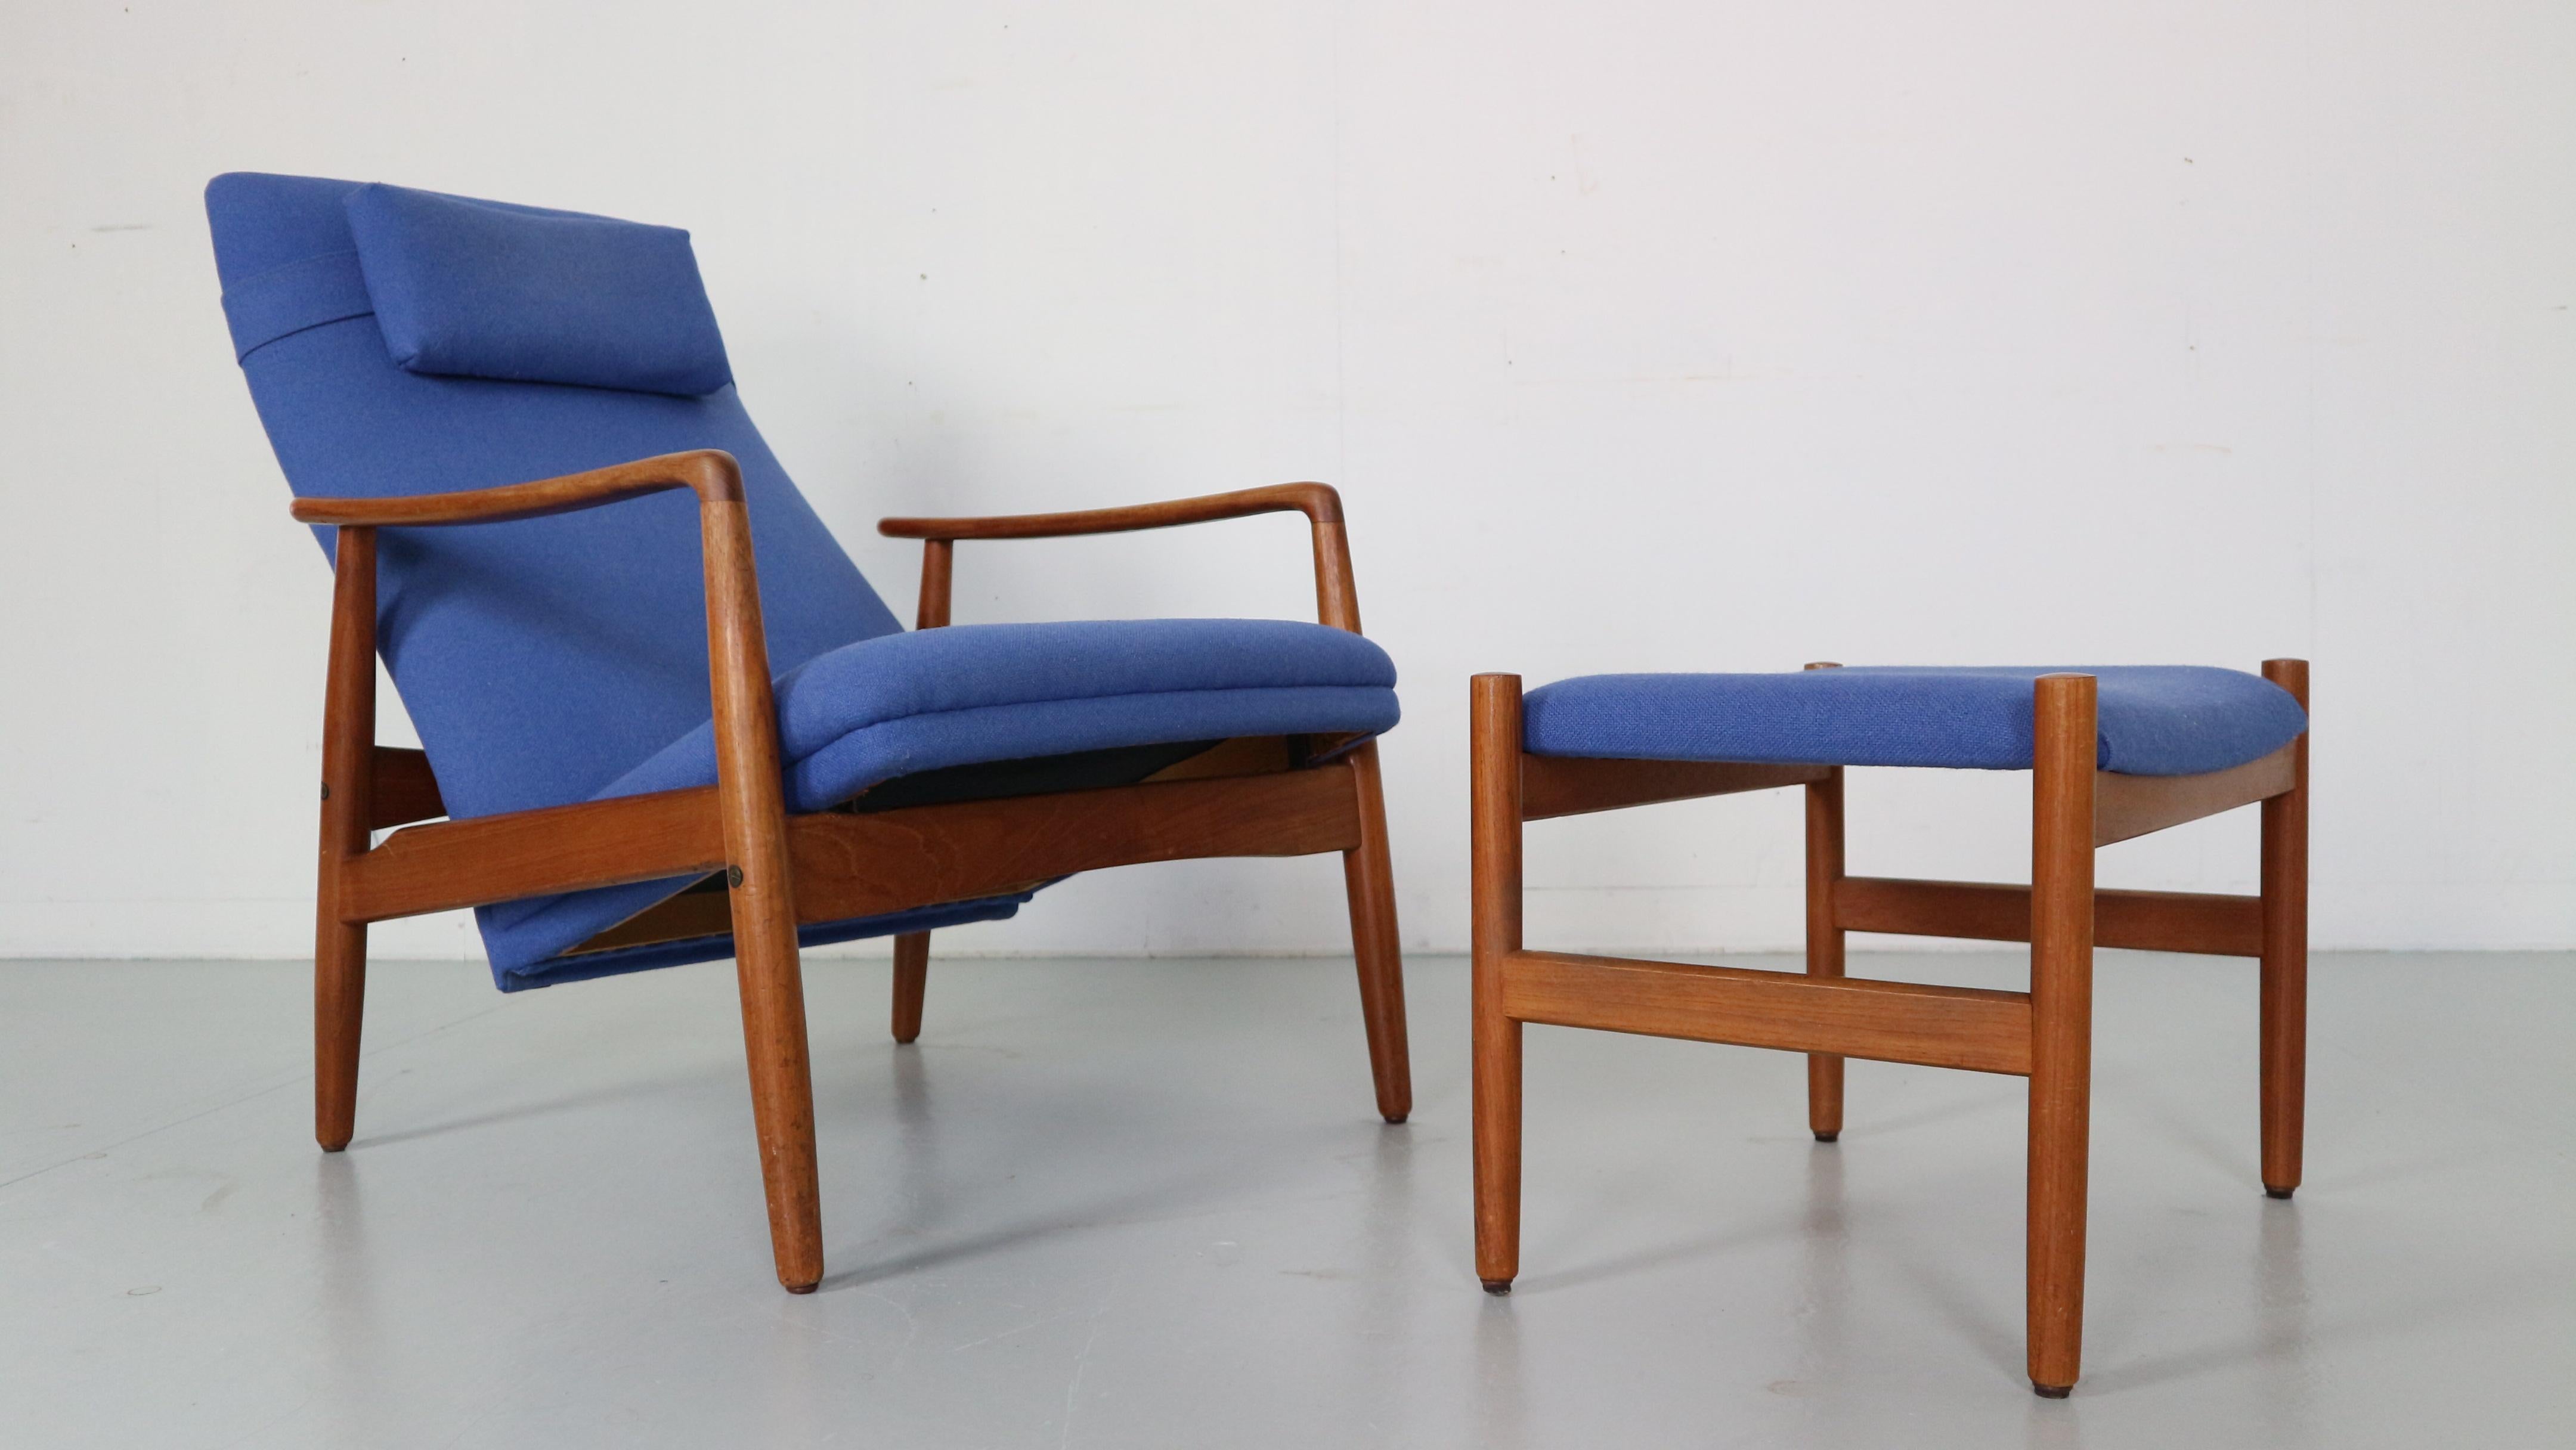 Stylish Vintage Danish teak easy chair with ottoman designed by Søren Ladefoged for Danish manufacturer SL Møbler. This comfortable, solid teak chair features the typical midcentury Denmark organic design and blue upholstery. Adjustable in 2